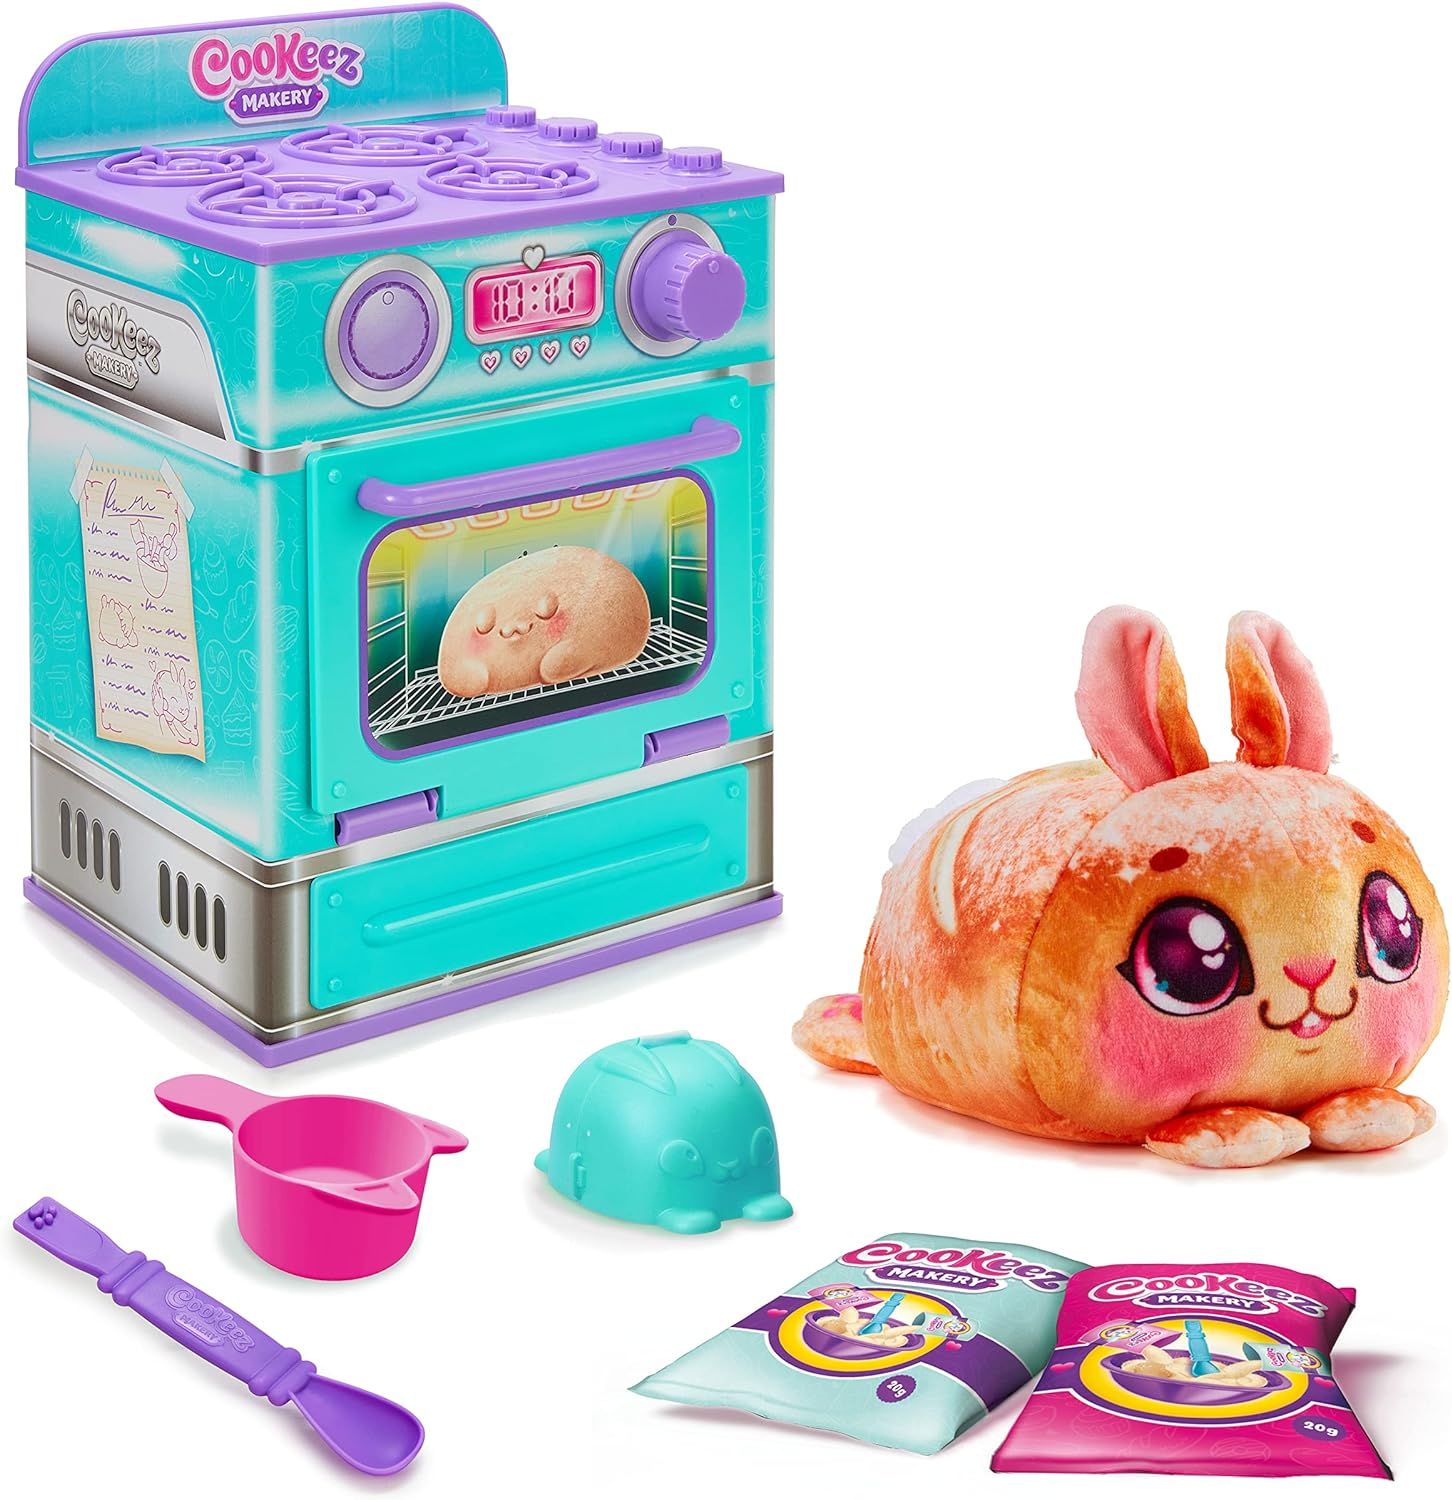 COOKEEZ MAKERY Baked Treatz Oven. Mix & Make a Plush Best Friend! Place Your Dough in The Oven an... | Amazon (US)